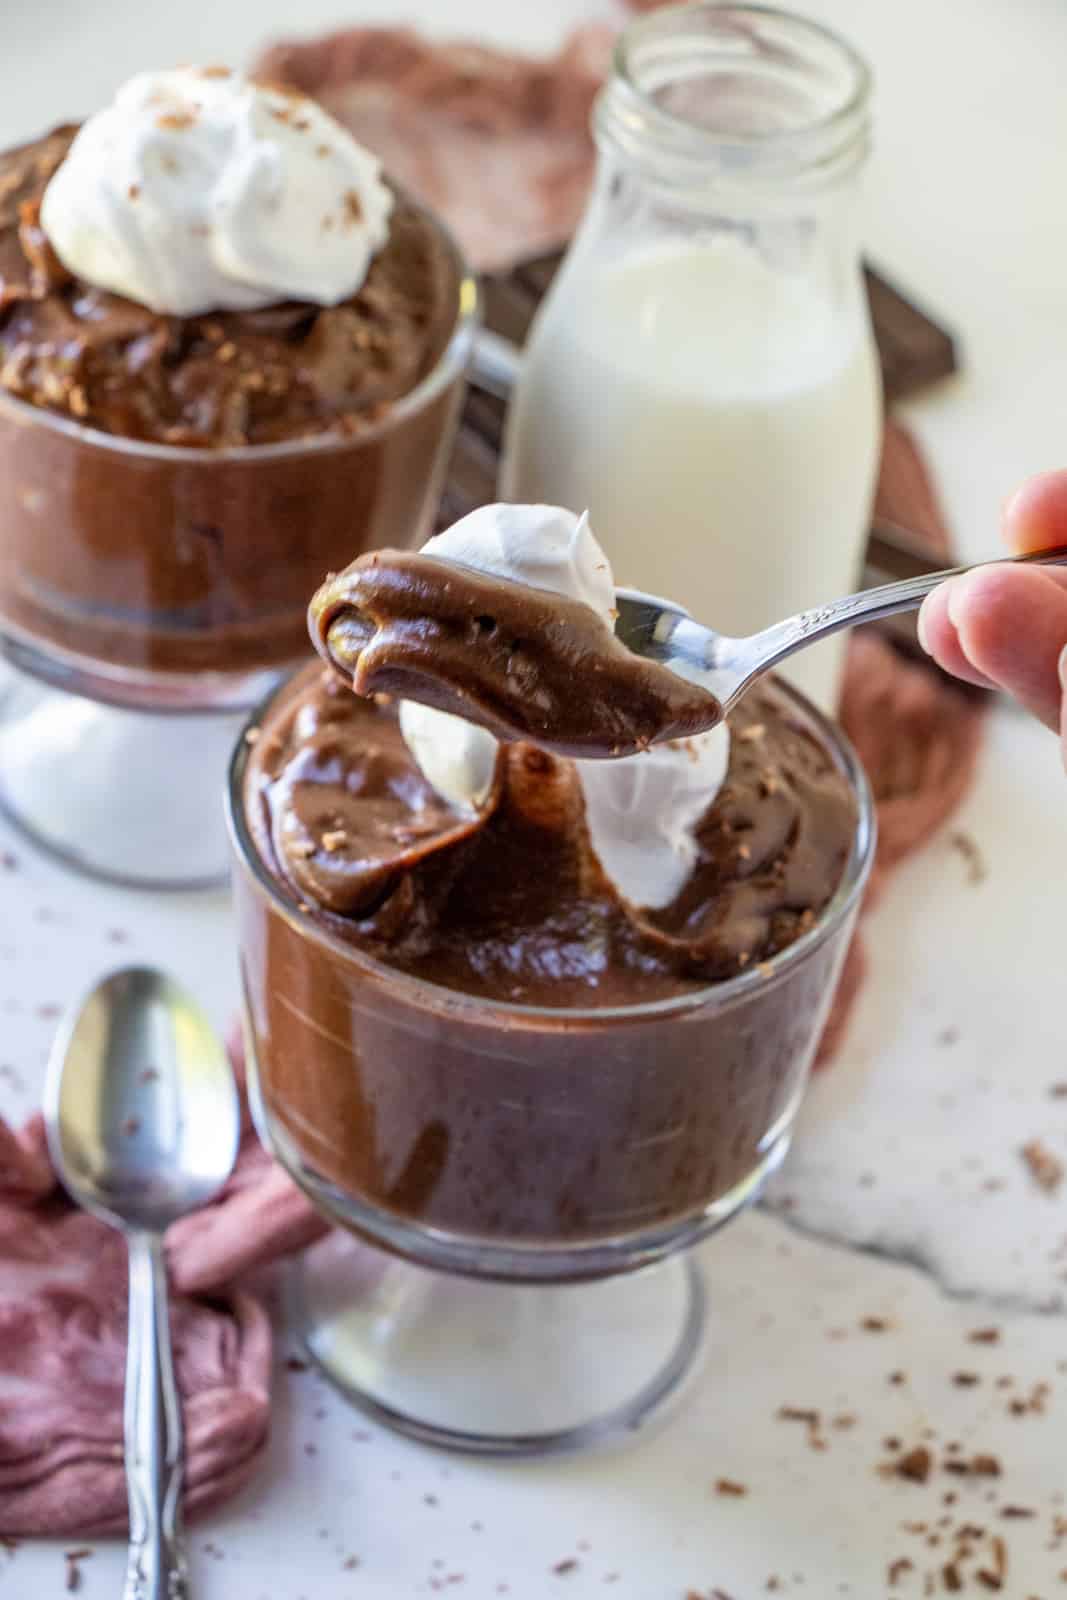 Spoonful of chocolate pudding